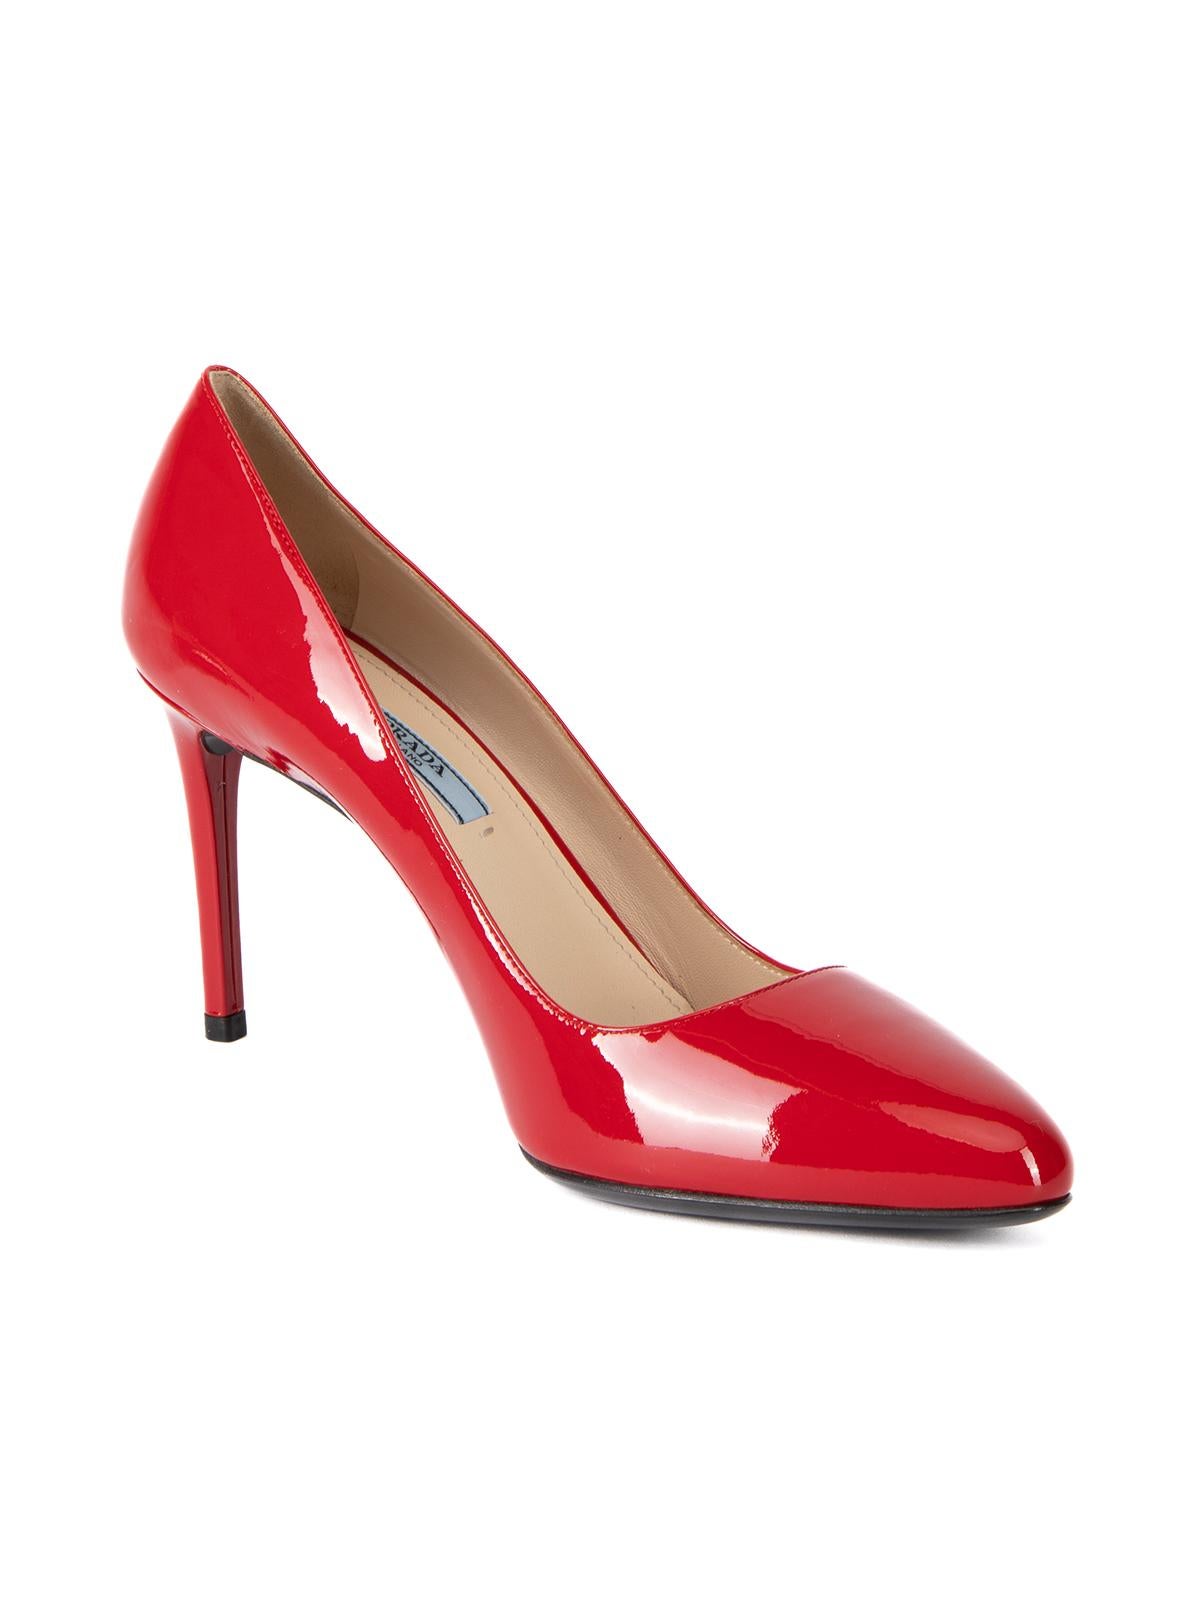 CONDITION is Very good. No visible wear to heels is evident on this used Prada designer resale item.   Details  Red Patent leather Pumps High heel Almond toe Comes with dust bag and original box    Made in Italy    Composition Patent leather   Size